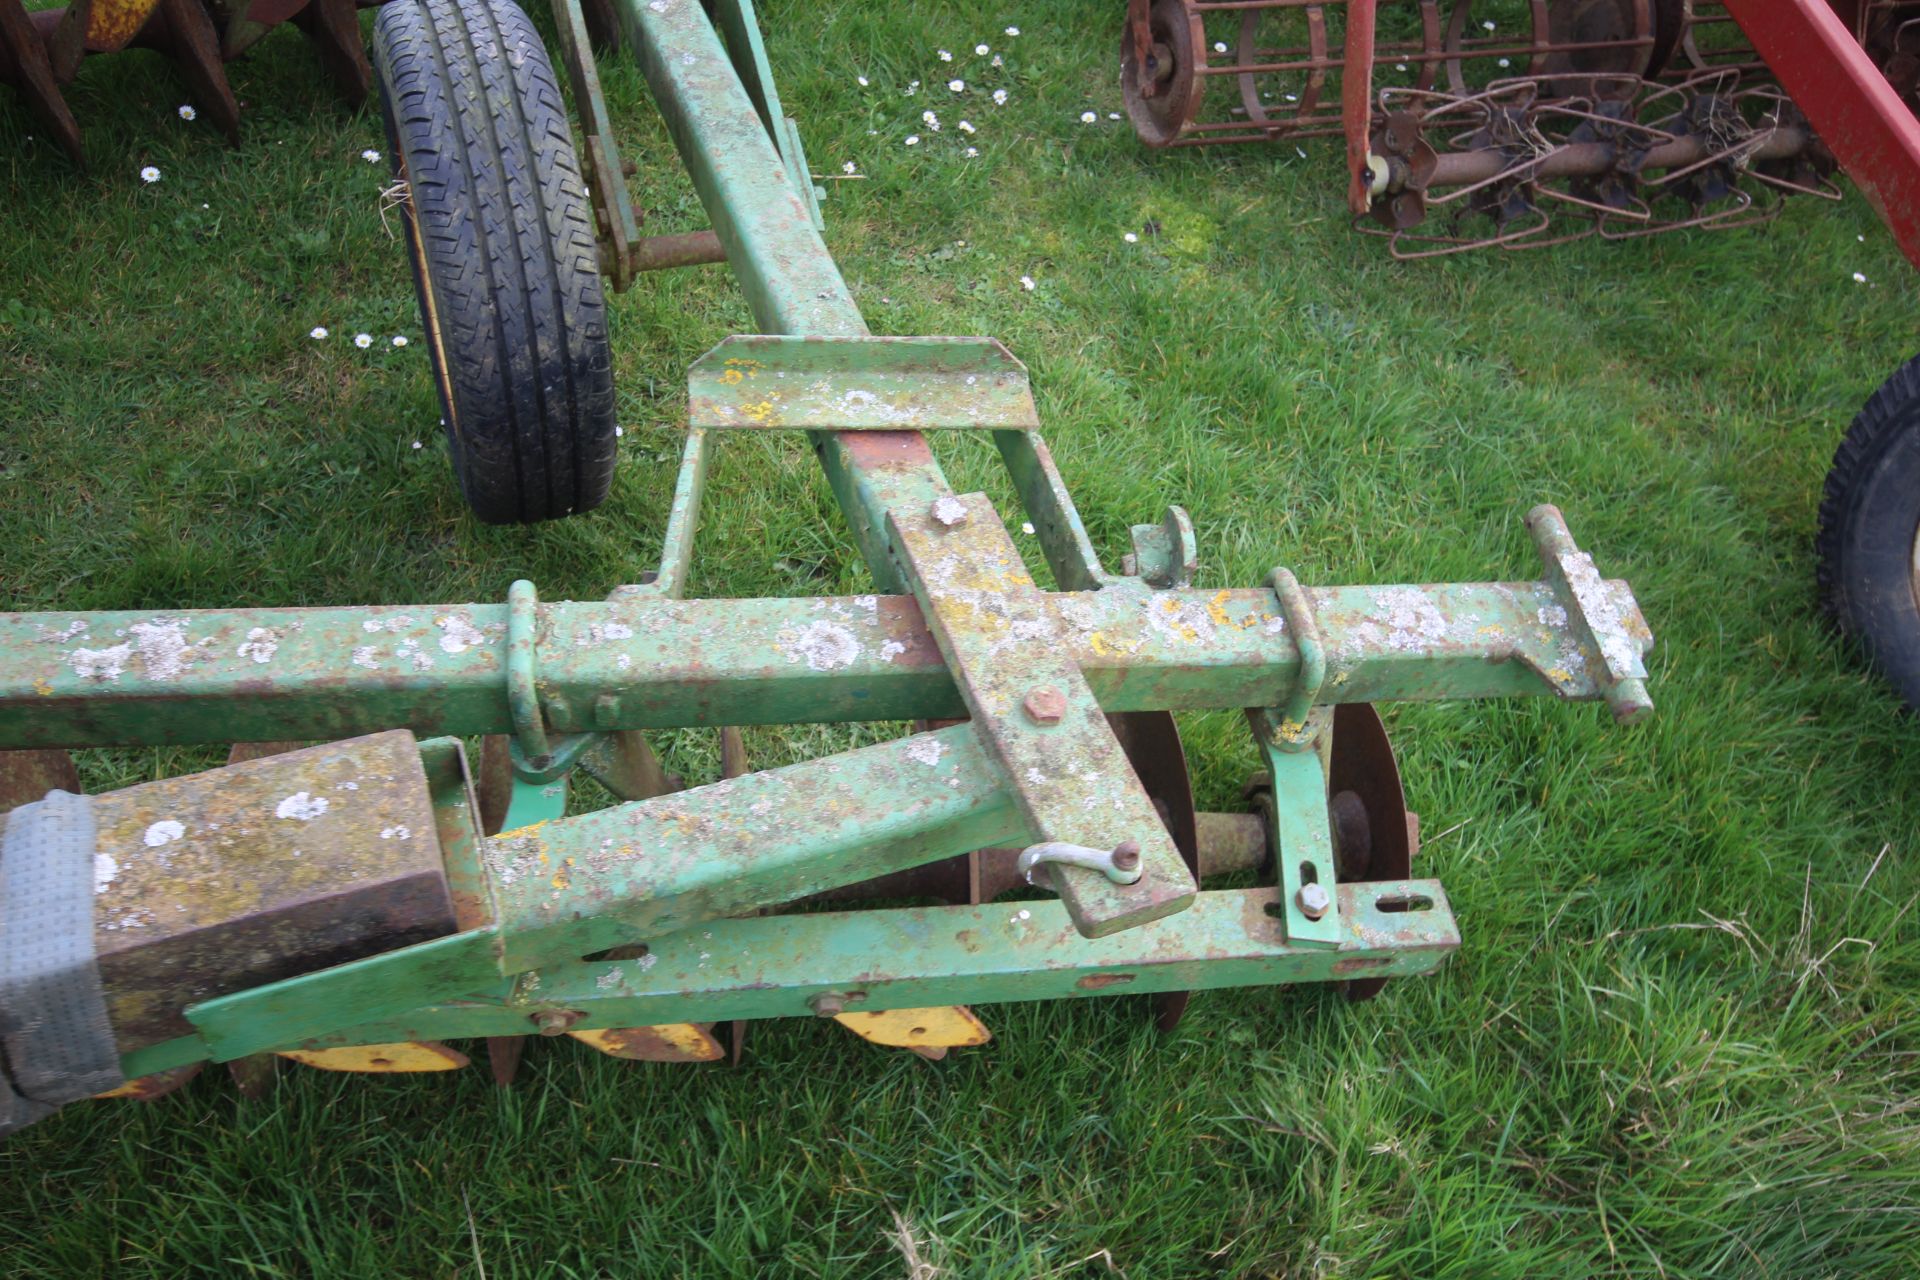 John Deere 3.5m trailed discs. For sale due to retirement. V - Image 10 of 15